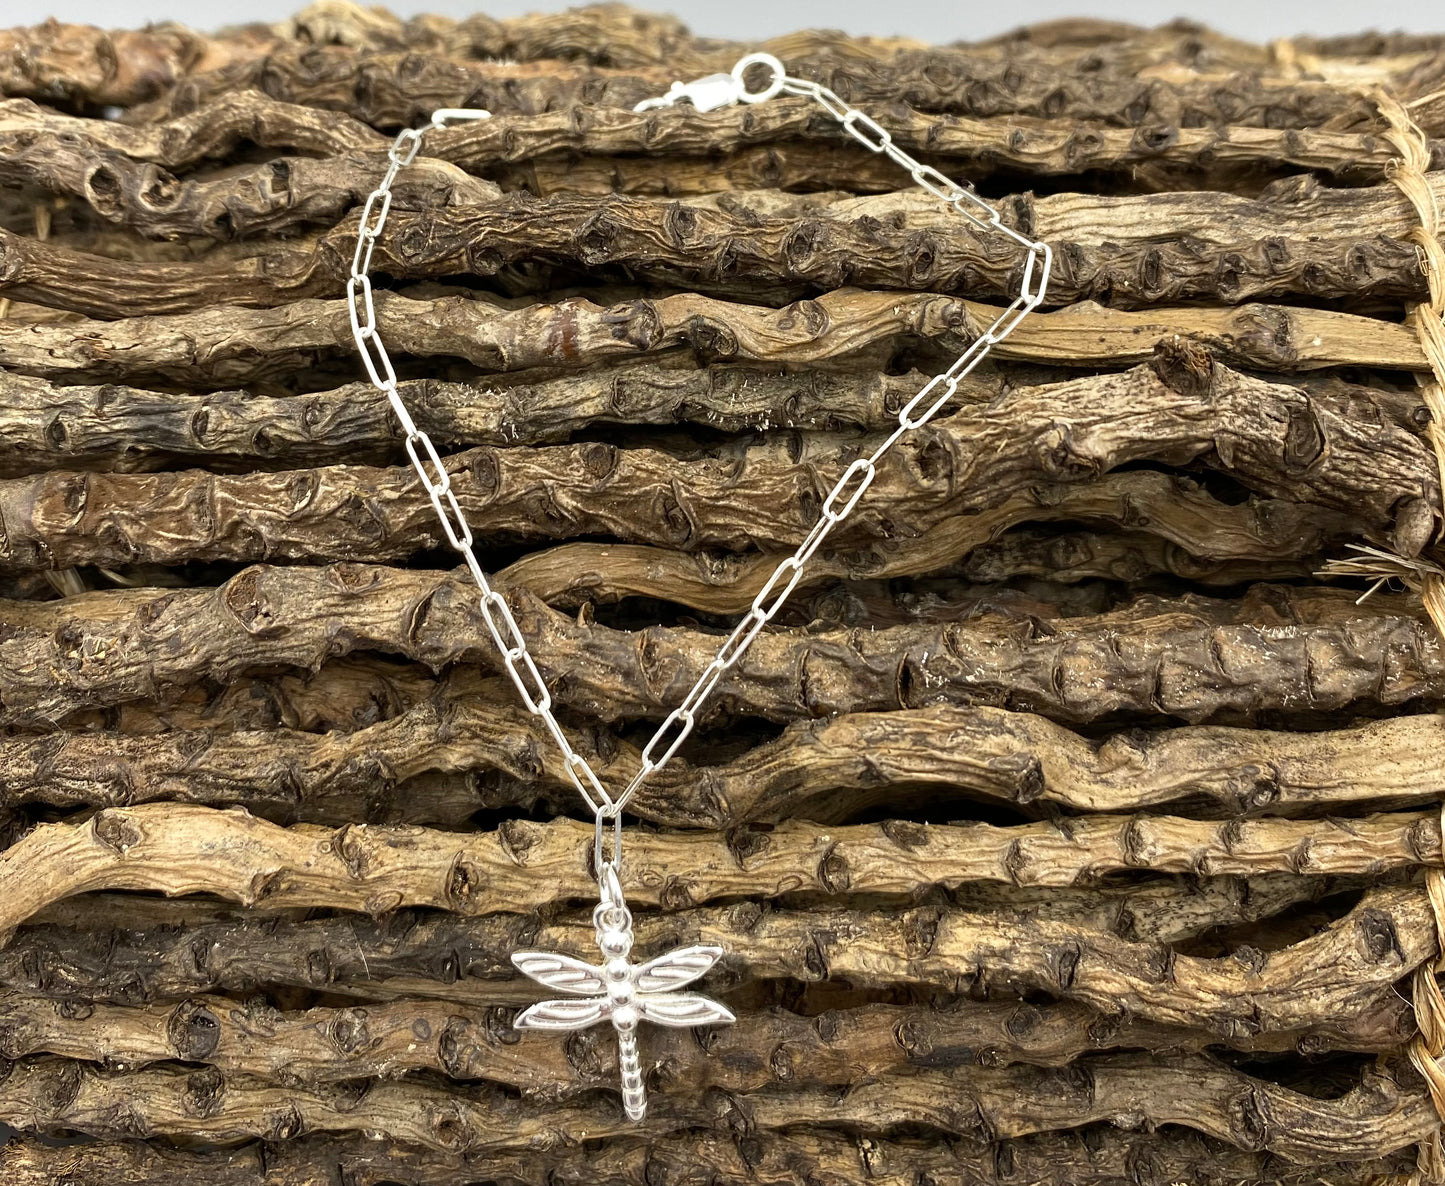 Sterling silver dragonfly charm skinny trace chain bracelet